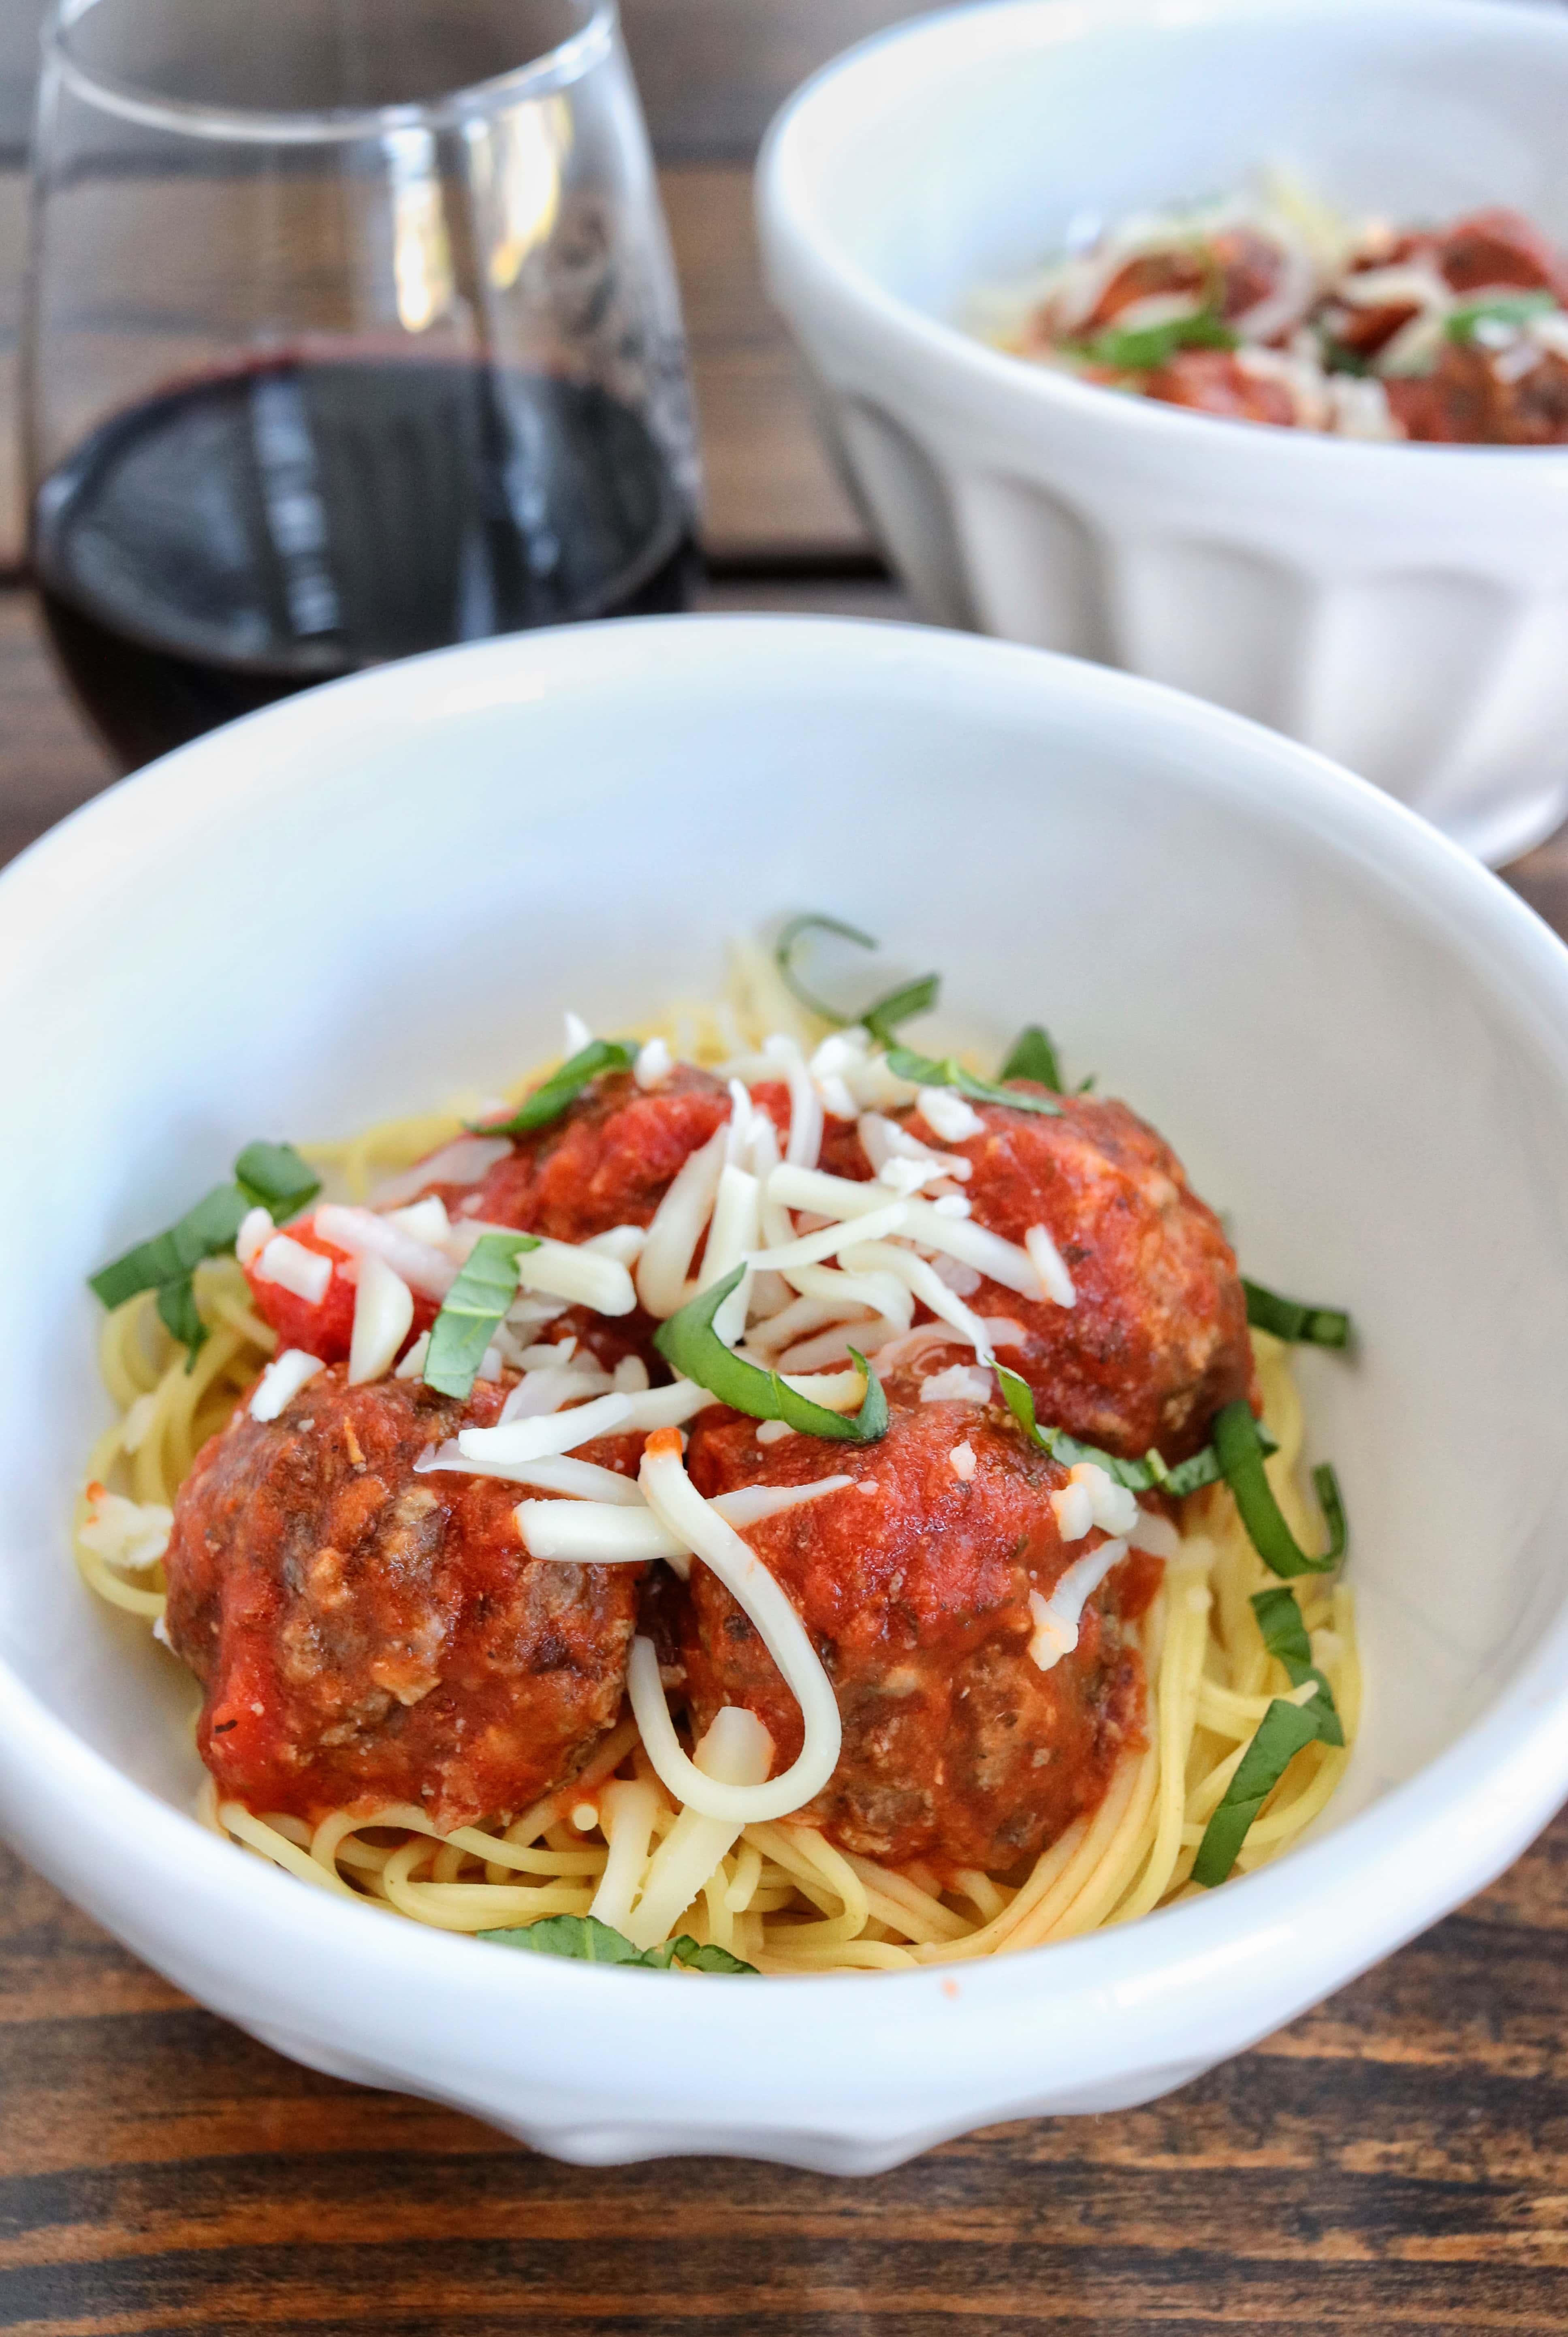 Best Baked Meatballs with spaghetti, topped with shredded mozzarella cheese and fresh basil| The Nutrition Adventure